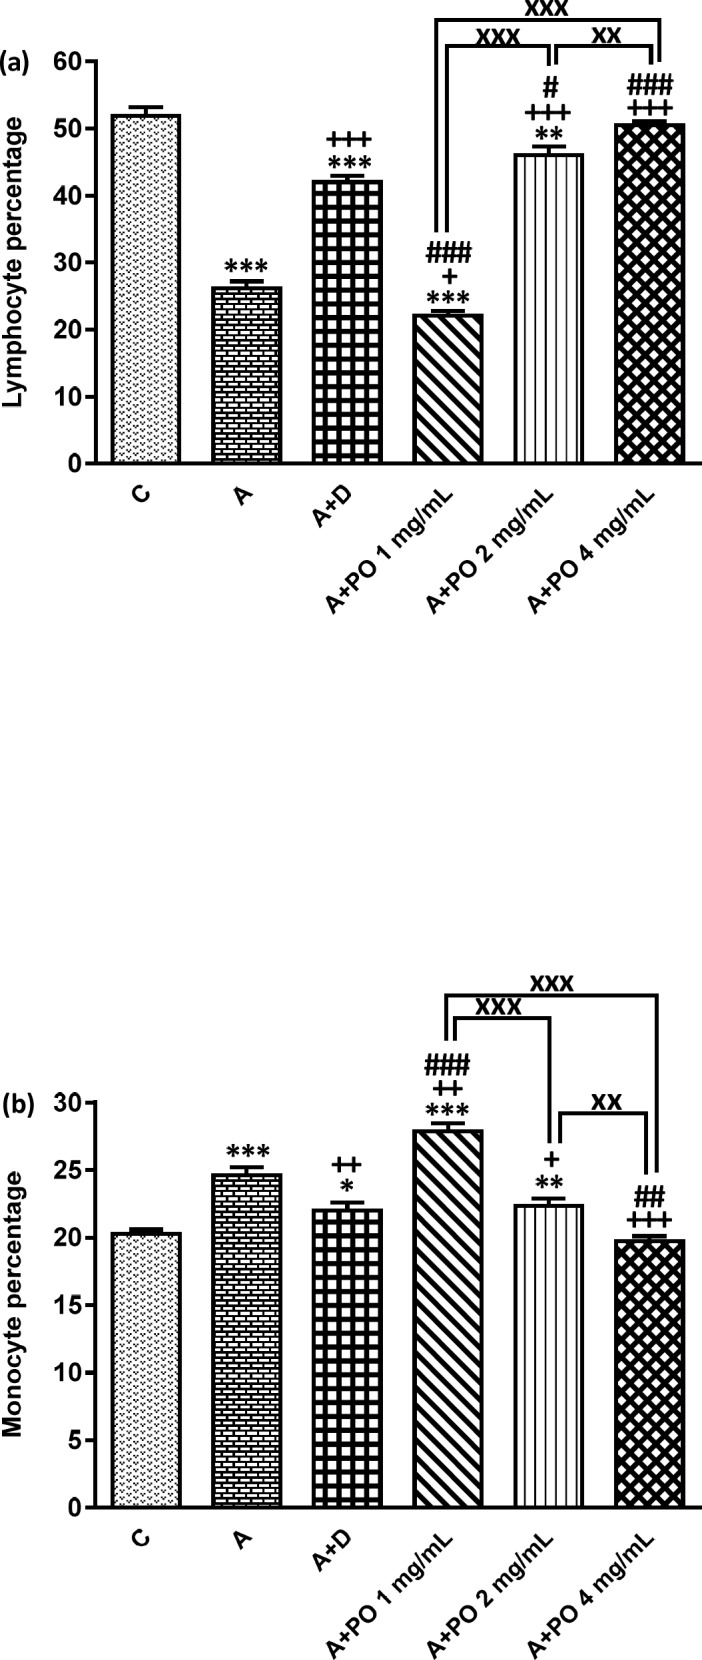 Percentages of lymphocyte (a) and monocyte (b) in bronchoalveolar lavage fluid (BALF) of control animals (C), asthma group (A), asthmatic rats treated with dexamethasone (A+D) and asthmatic rats treated with P. oleracea (PO 1, 2 and 4 mg/mL) (n = 8 in each group). Data are presented as expressed as mean ± SEM values. * p < 0.05, ** p < 0.01 and *** p < 0.001 show significant differences compared to group C. + p < 0.05, ++ p < 0.01 and +++ p < 0.001 show significant differences compared to group A. ## p < 0.05, ## p < 0.01 and ### p < 0.001 show significant differences compared to group A+D. xx p < 0.01 and xxx p < 0.001 show significant differences among the three concentrations of P. oleracea. Statistical analyses were performed using one way analysis of variance (ANOVA) with Tukey-Kramer’s post-test